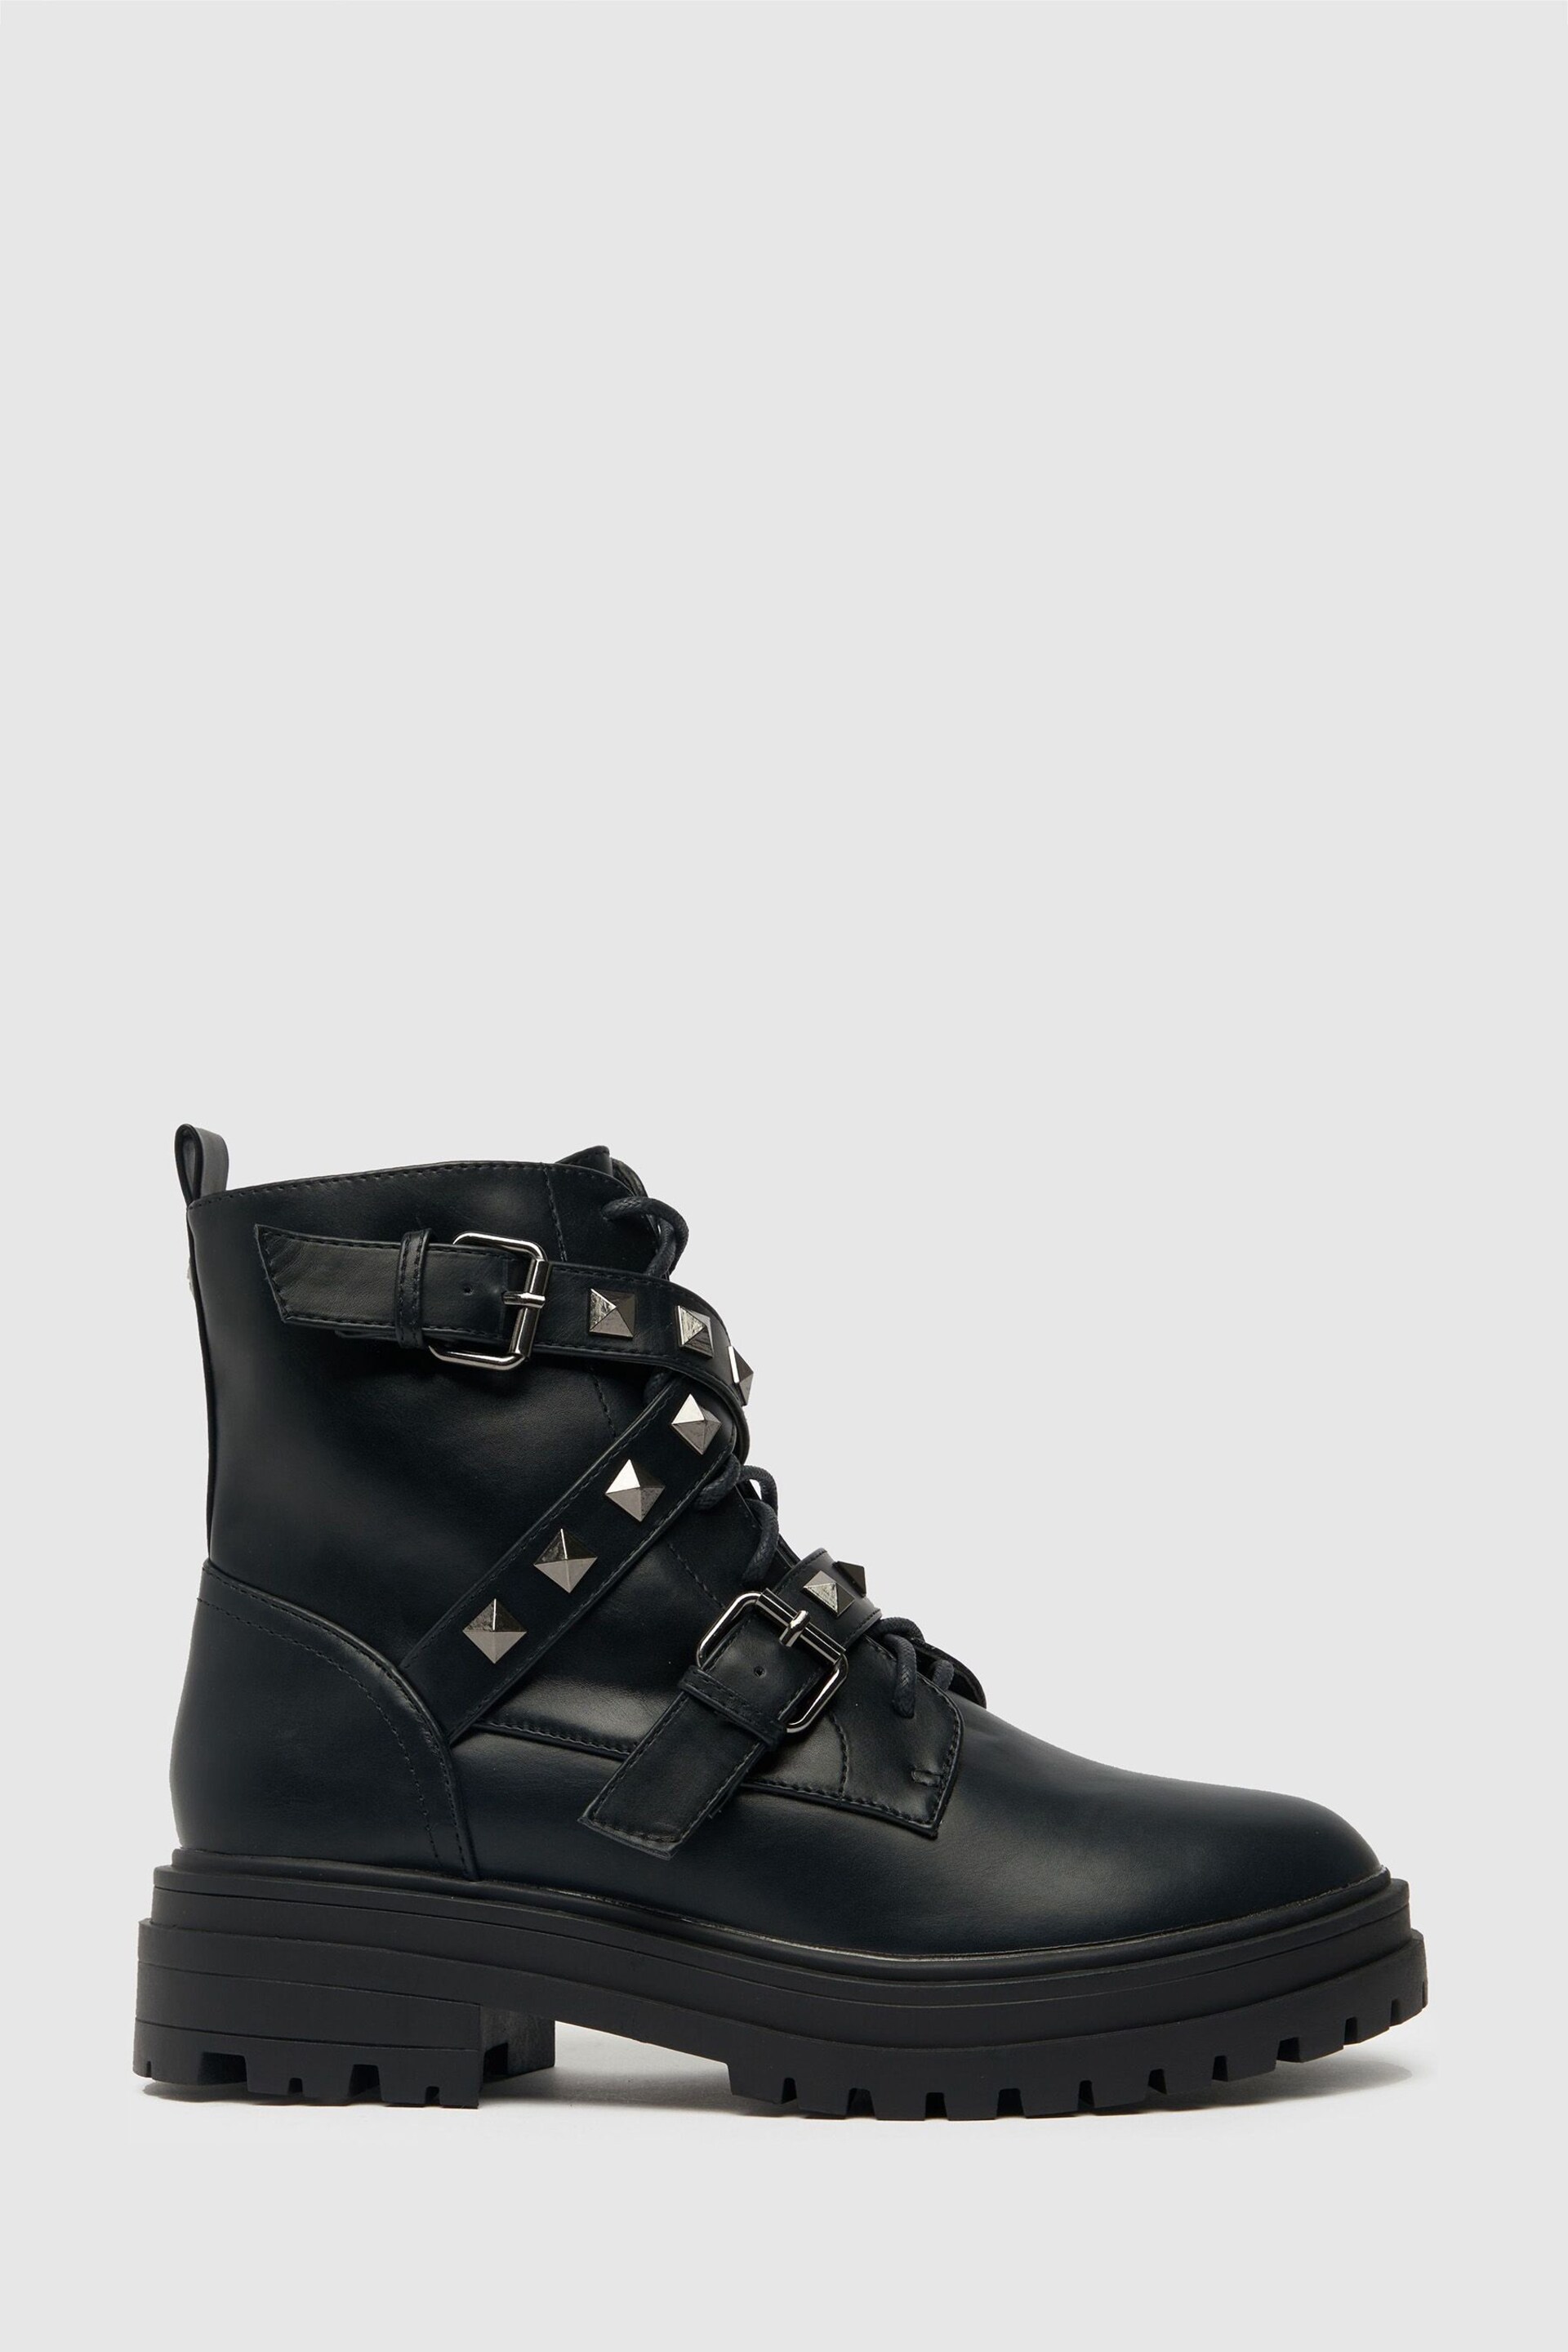 Schuh Arabella Black Hardware Lace-Up Boots - Image 1 of 4